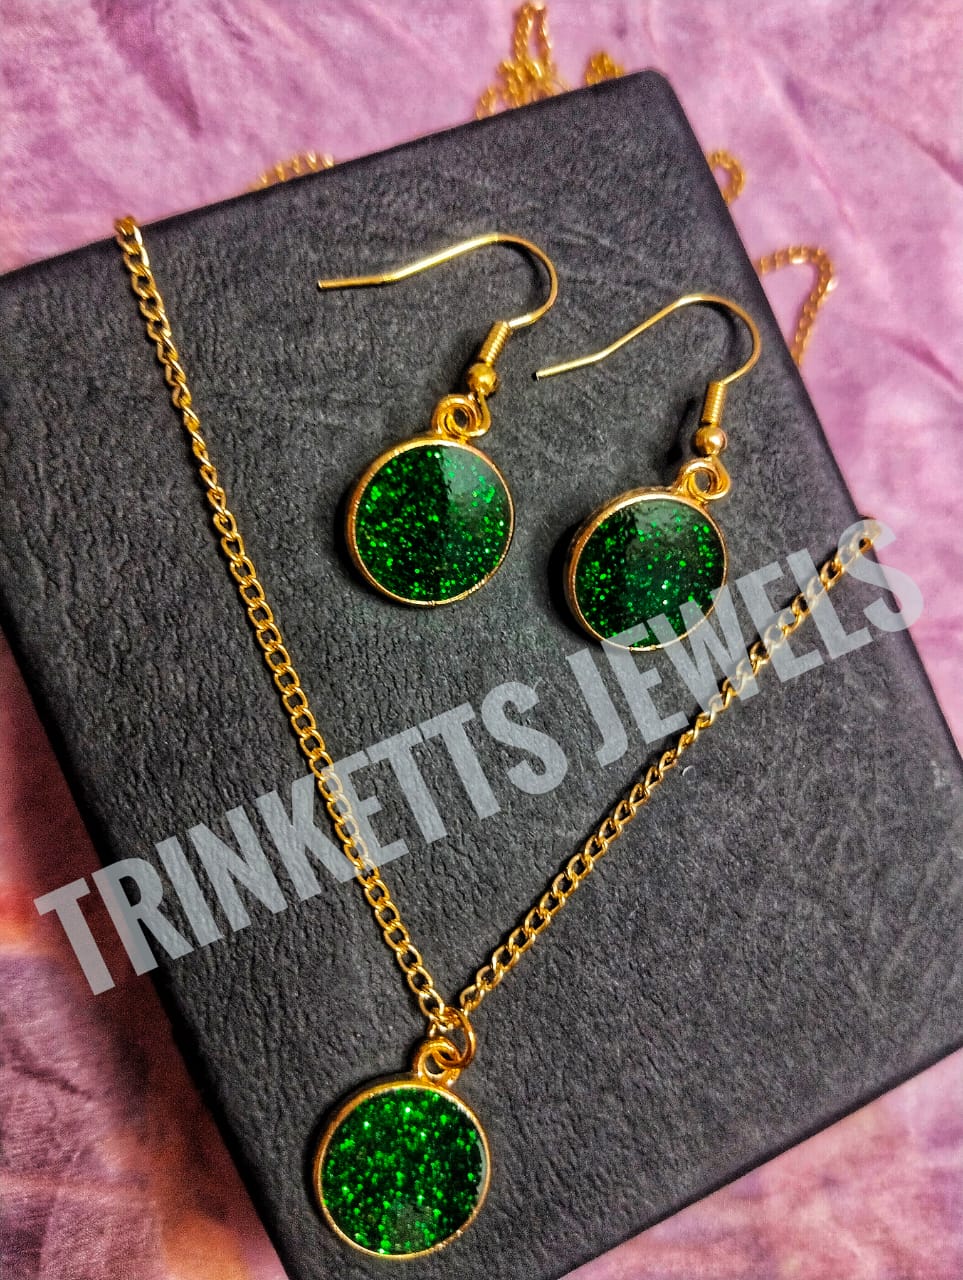 Trinketts Golden Combo Set: glittery green - A stylish combo featuring matching earrings and pendant with a golden polish. The pendant mirrors the unique design of the earrings. Ideal for both kids and teens, this funky set adds a touch of individuality to your style. Perfect for Pakistani fashion enthusiasts seeking a blend of elegance and playfulness.